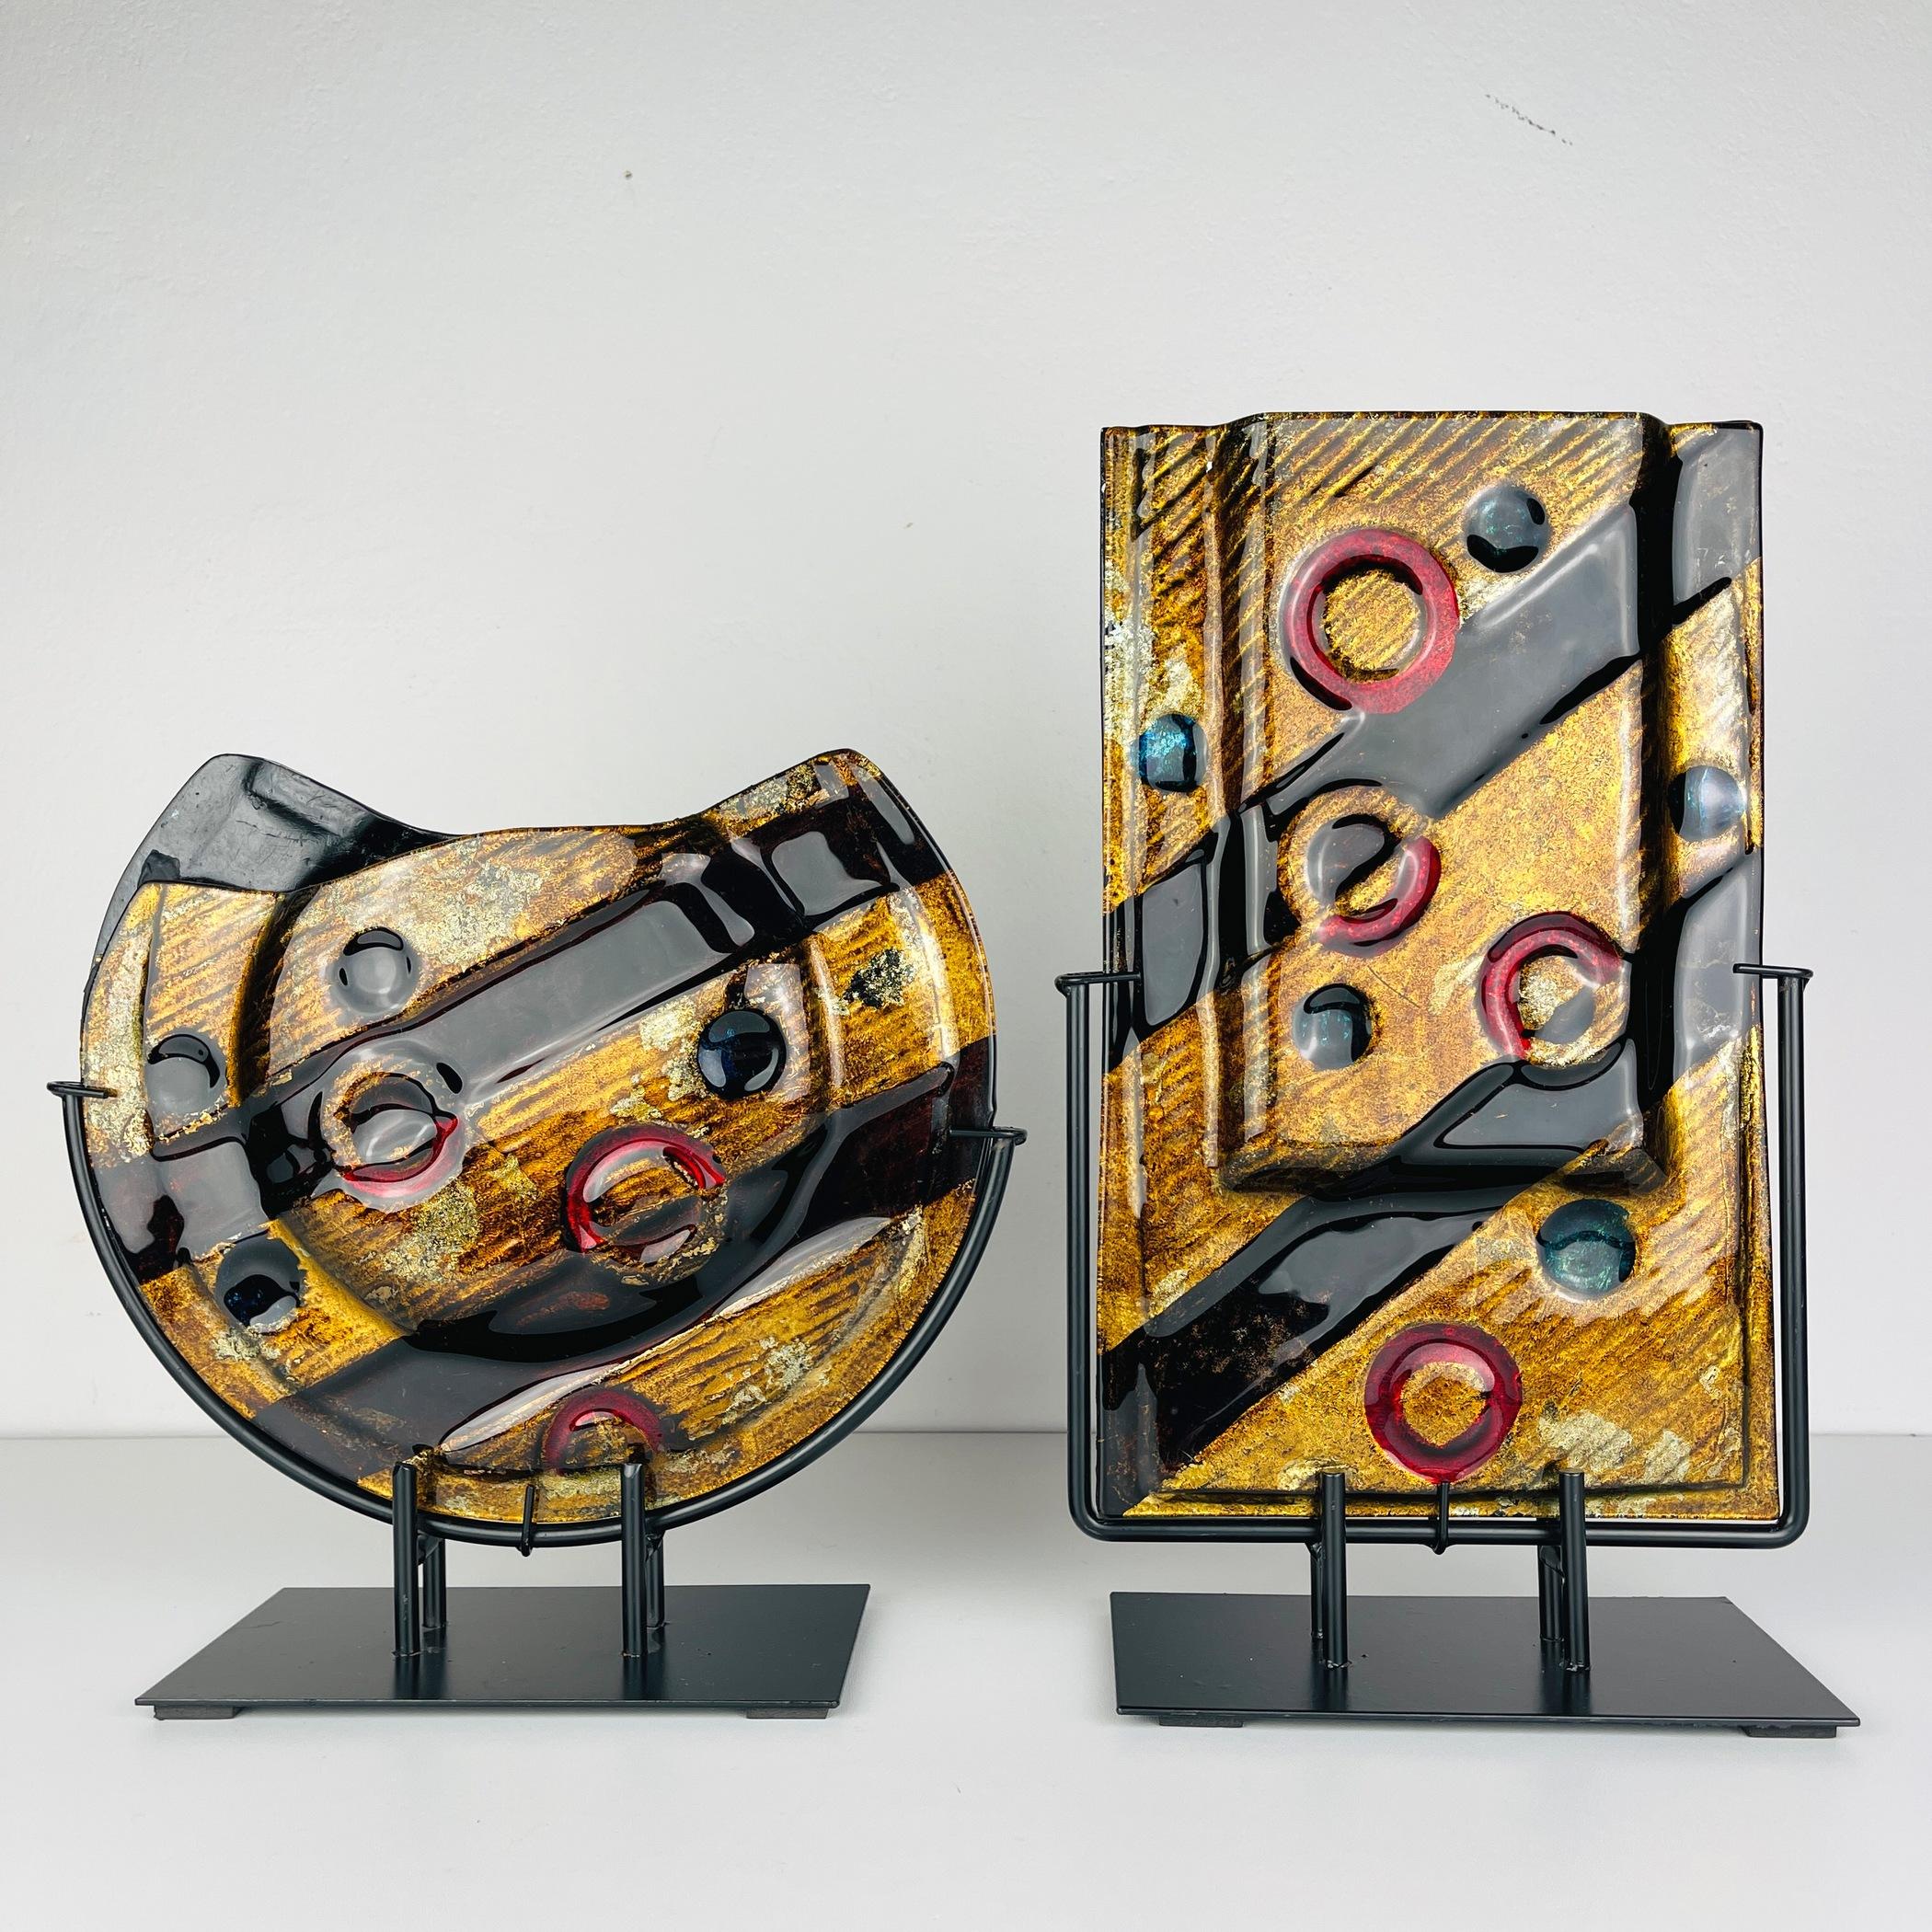 This exquisite set of two geometric vases showcases the timeless artistry of Arte Muranese, a venture that originated in Murano in 1983 under the guidance of master glassblower Luciano Nicetto. Luciano, having spent over three decades in various